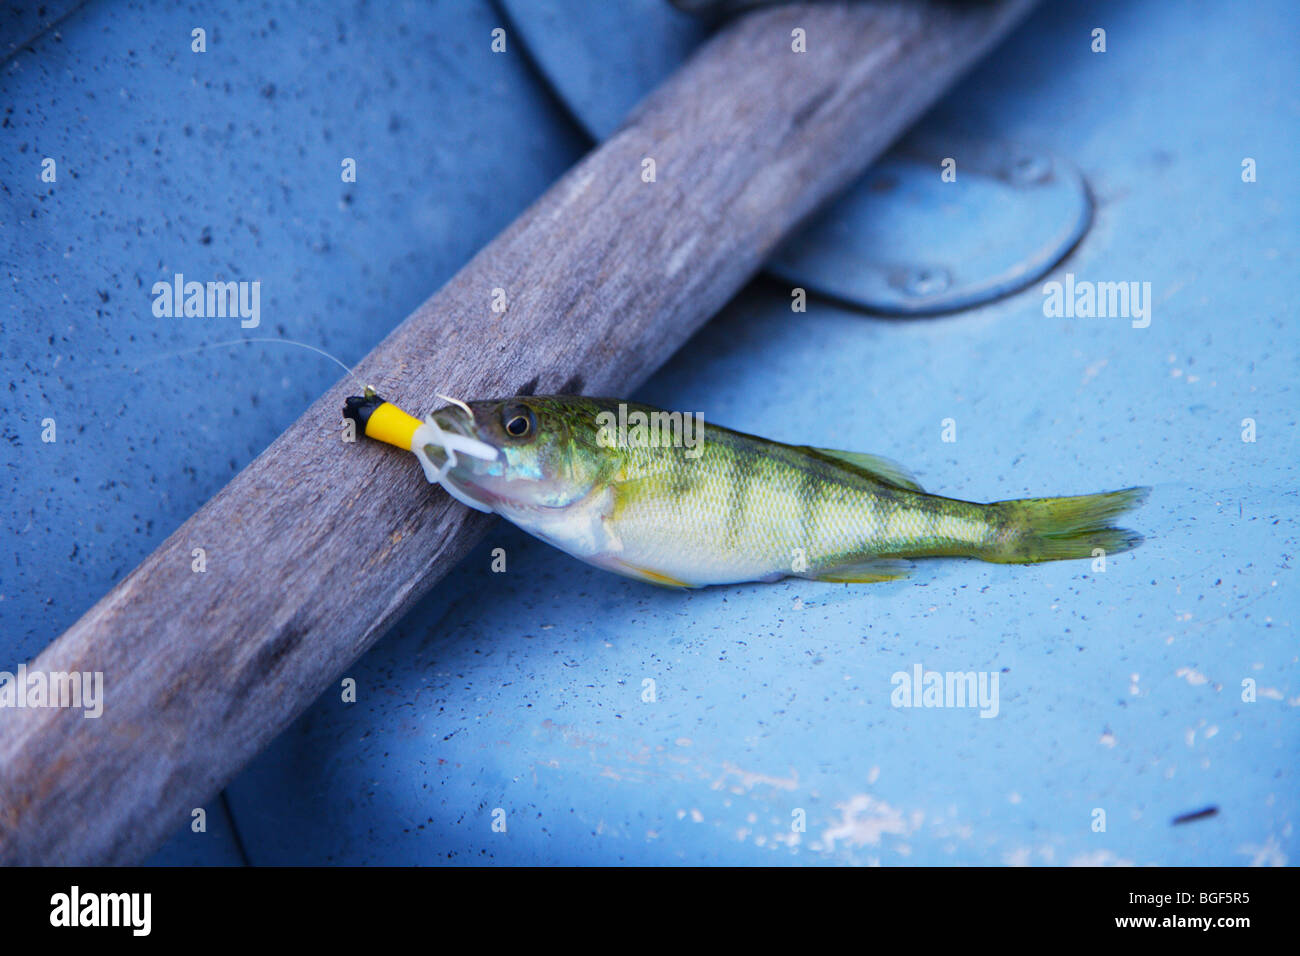 Close up perch fish laying in boat against oar Stock Photo